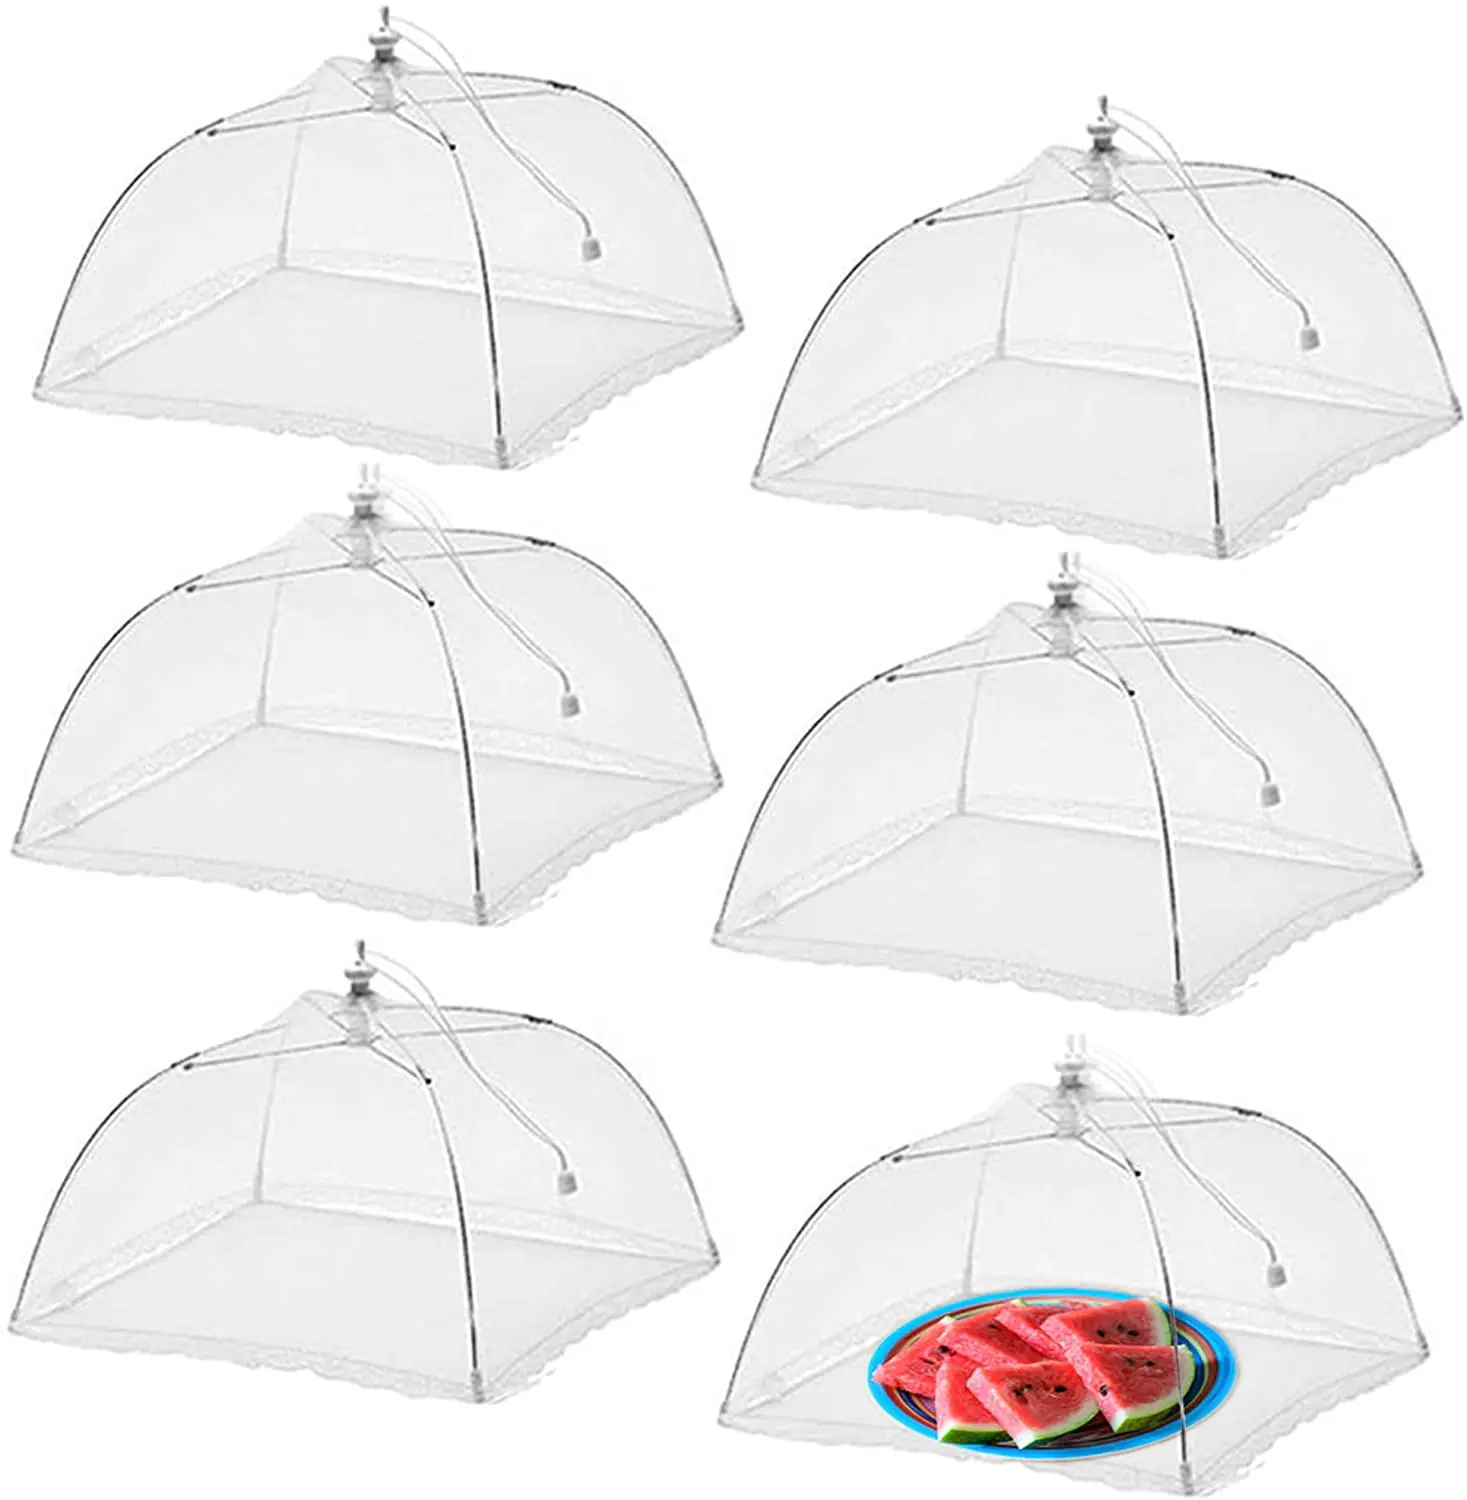 

Pop Up Mesh Food Tents Food Covers Umbrella Keep Out Flies Bugs Mosquitoes for Parties Picnics BBQ Reusable and Collapsible, White,pink,blue, brown and customized color